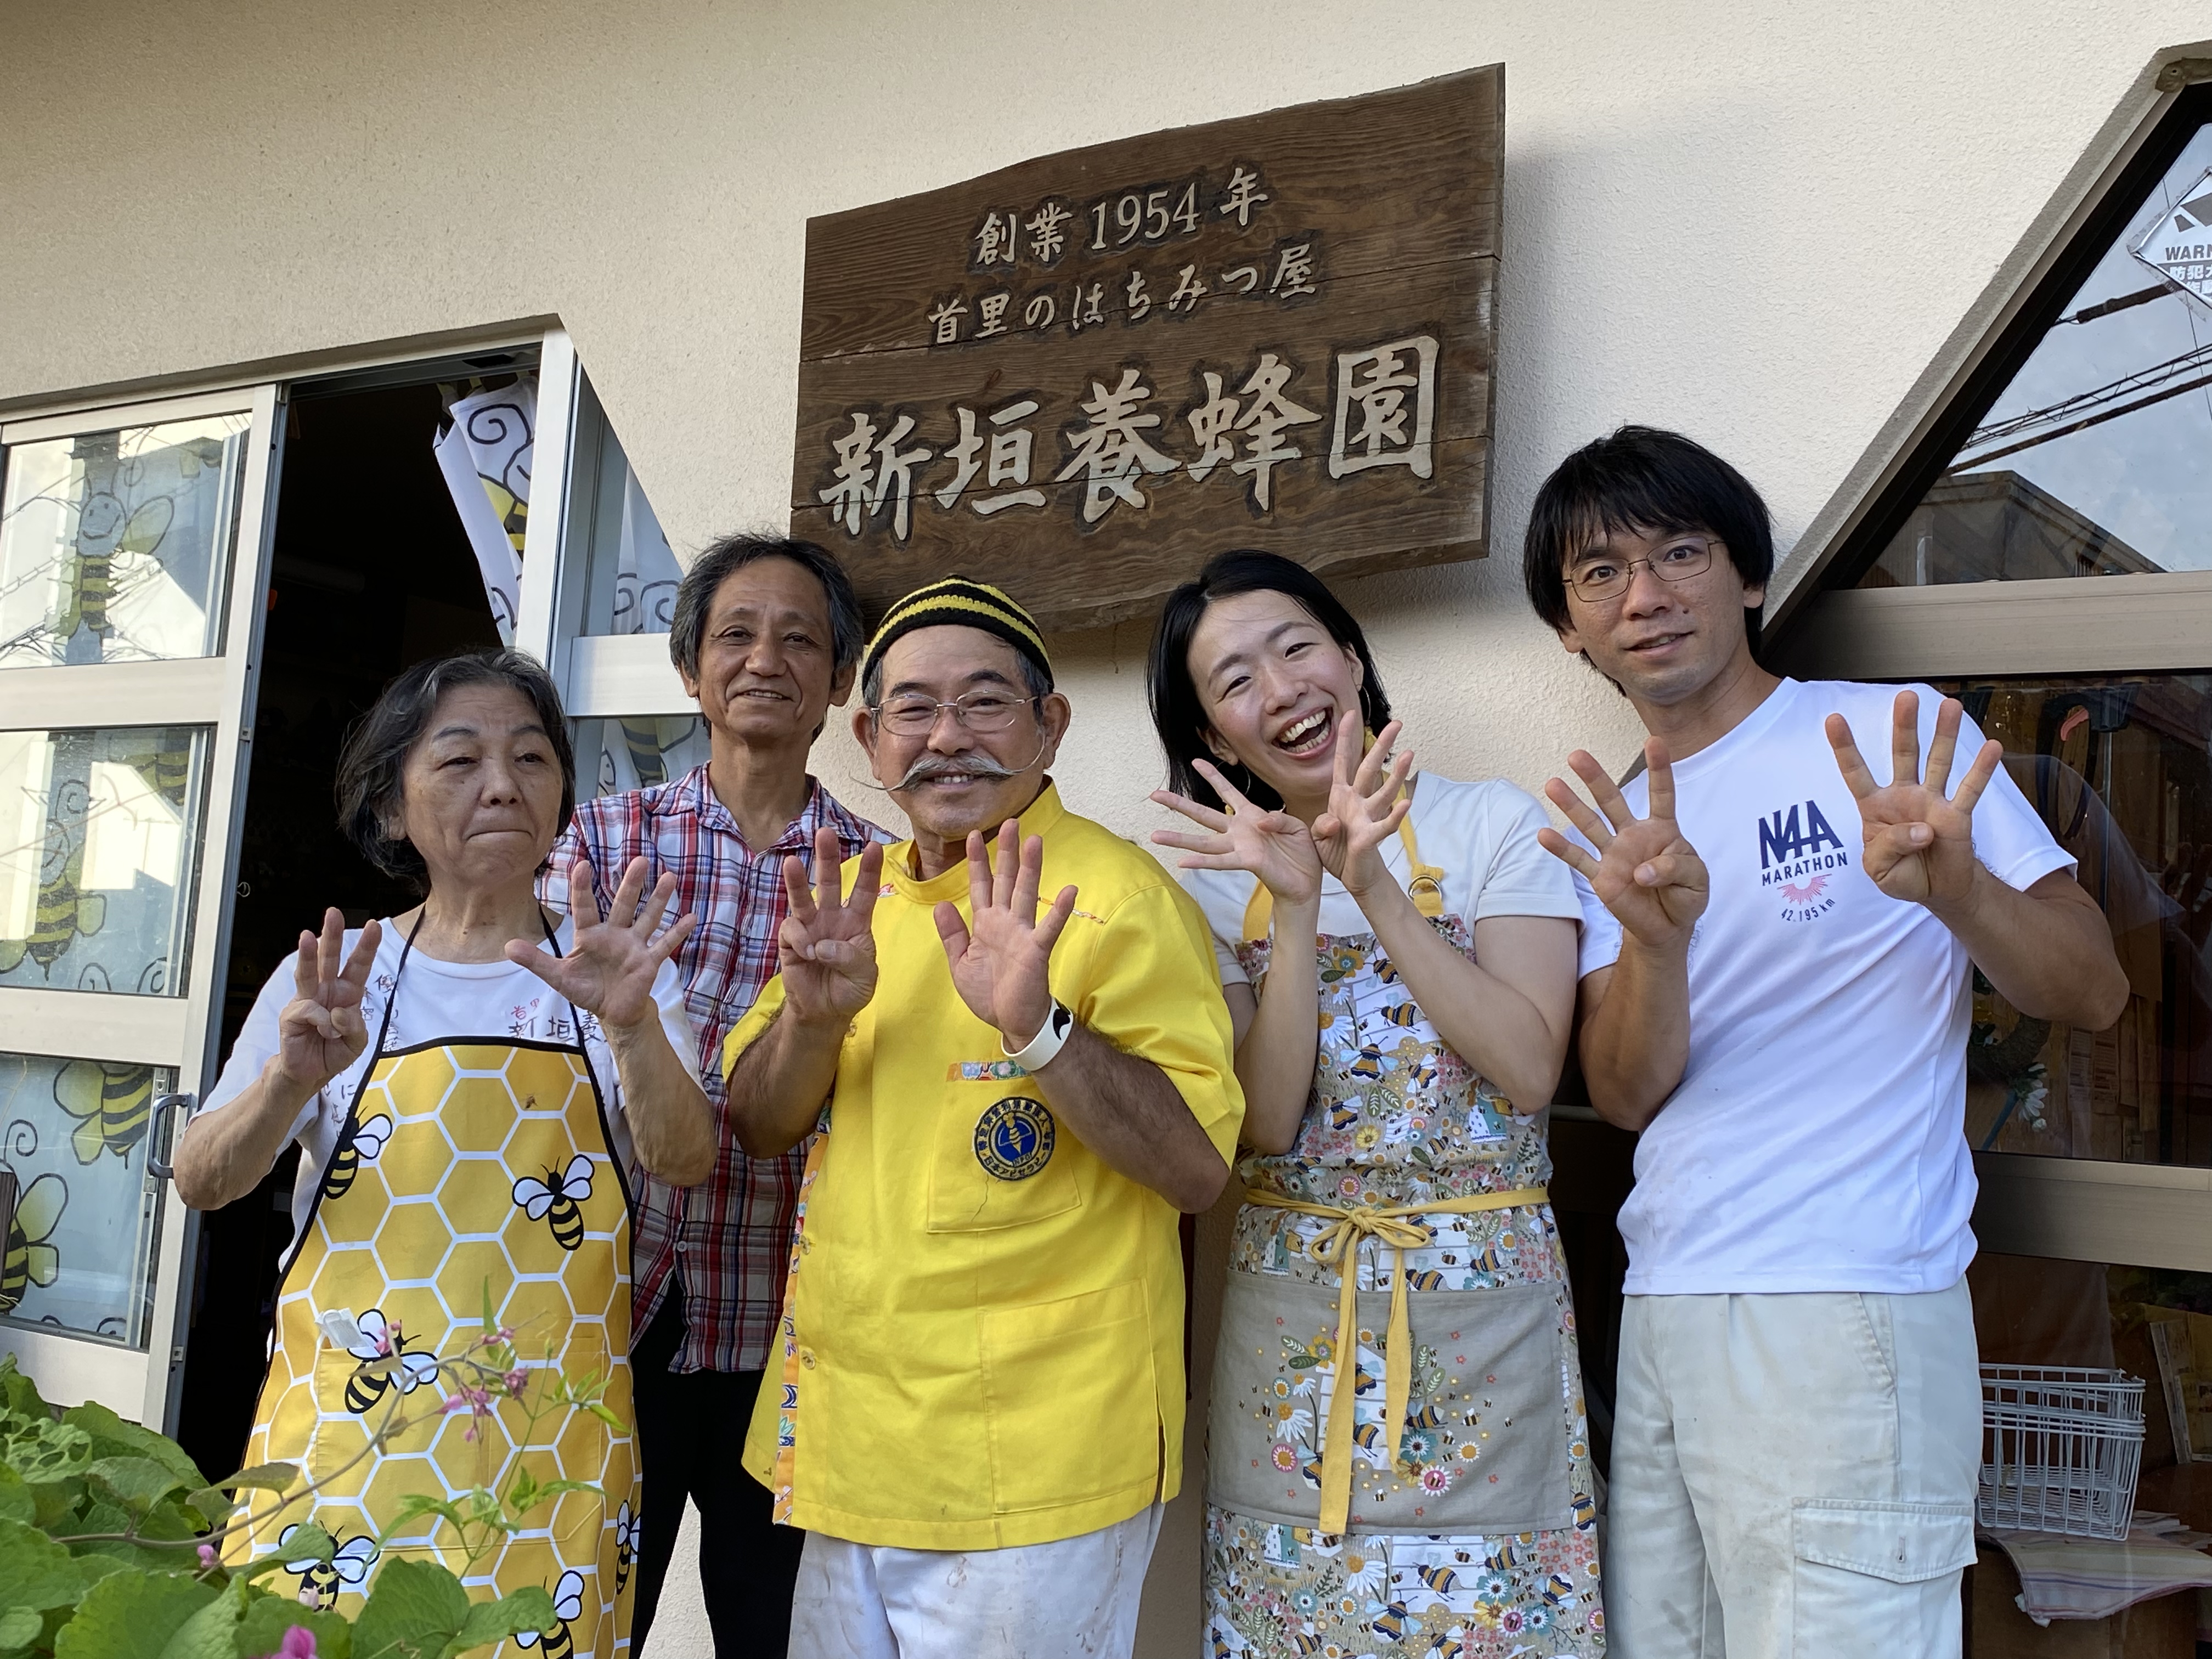 Dressed like a bee in the center, the representative of Arakaki Bee Farm with his family